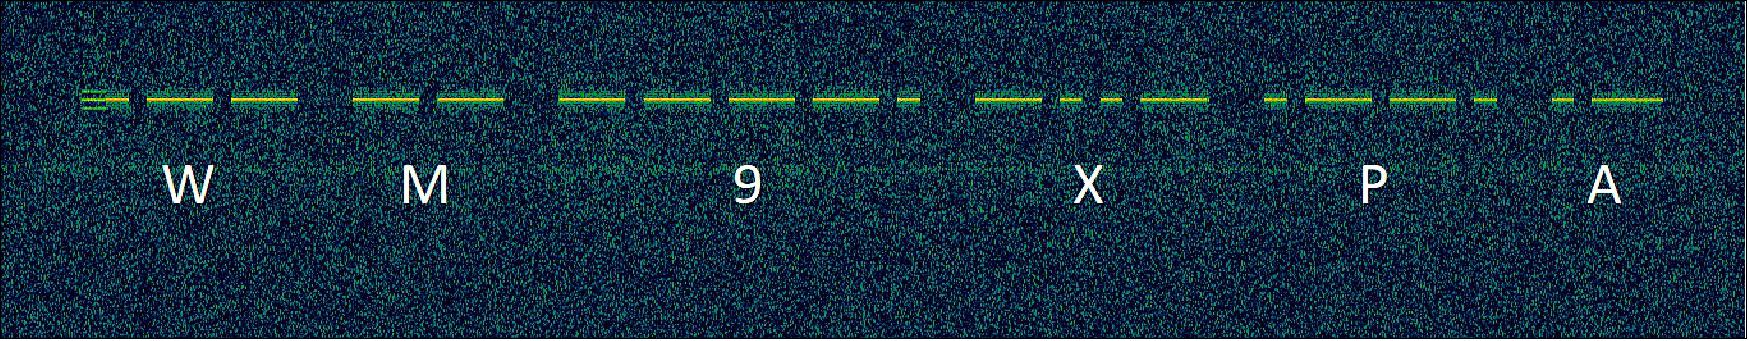 Figure 18: LightSail-2’s Morse code beacon as it was received on 2 July 2019. The beacon translates to the spacecraft’s call sign, WM9XPA (image credit: The Planetary Society)